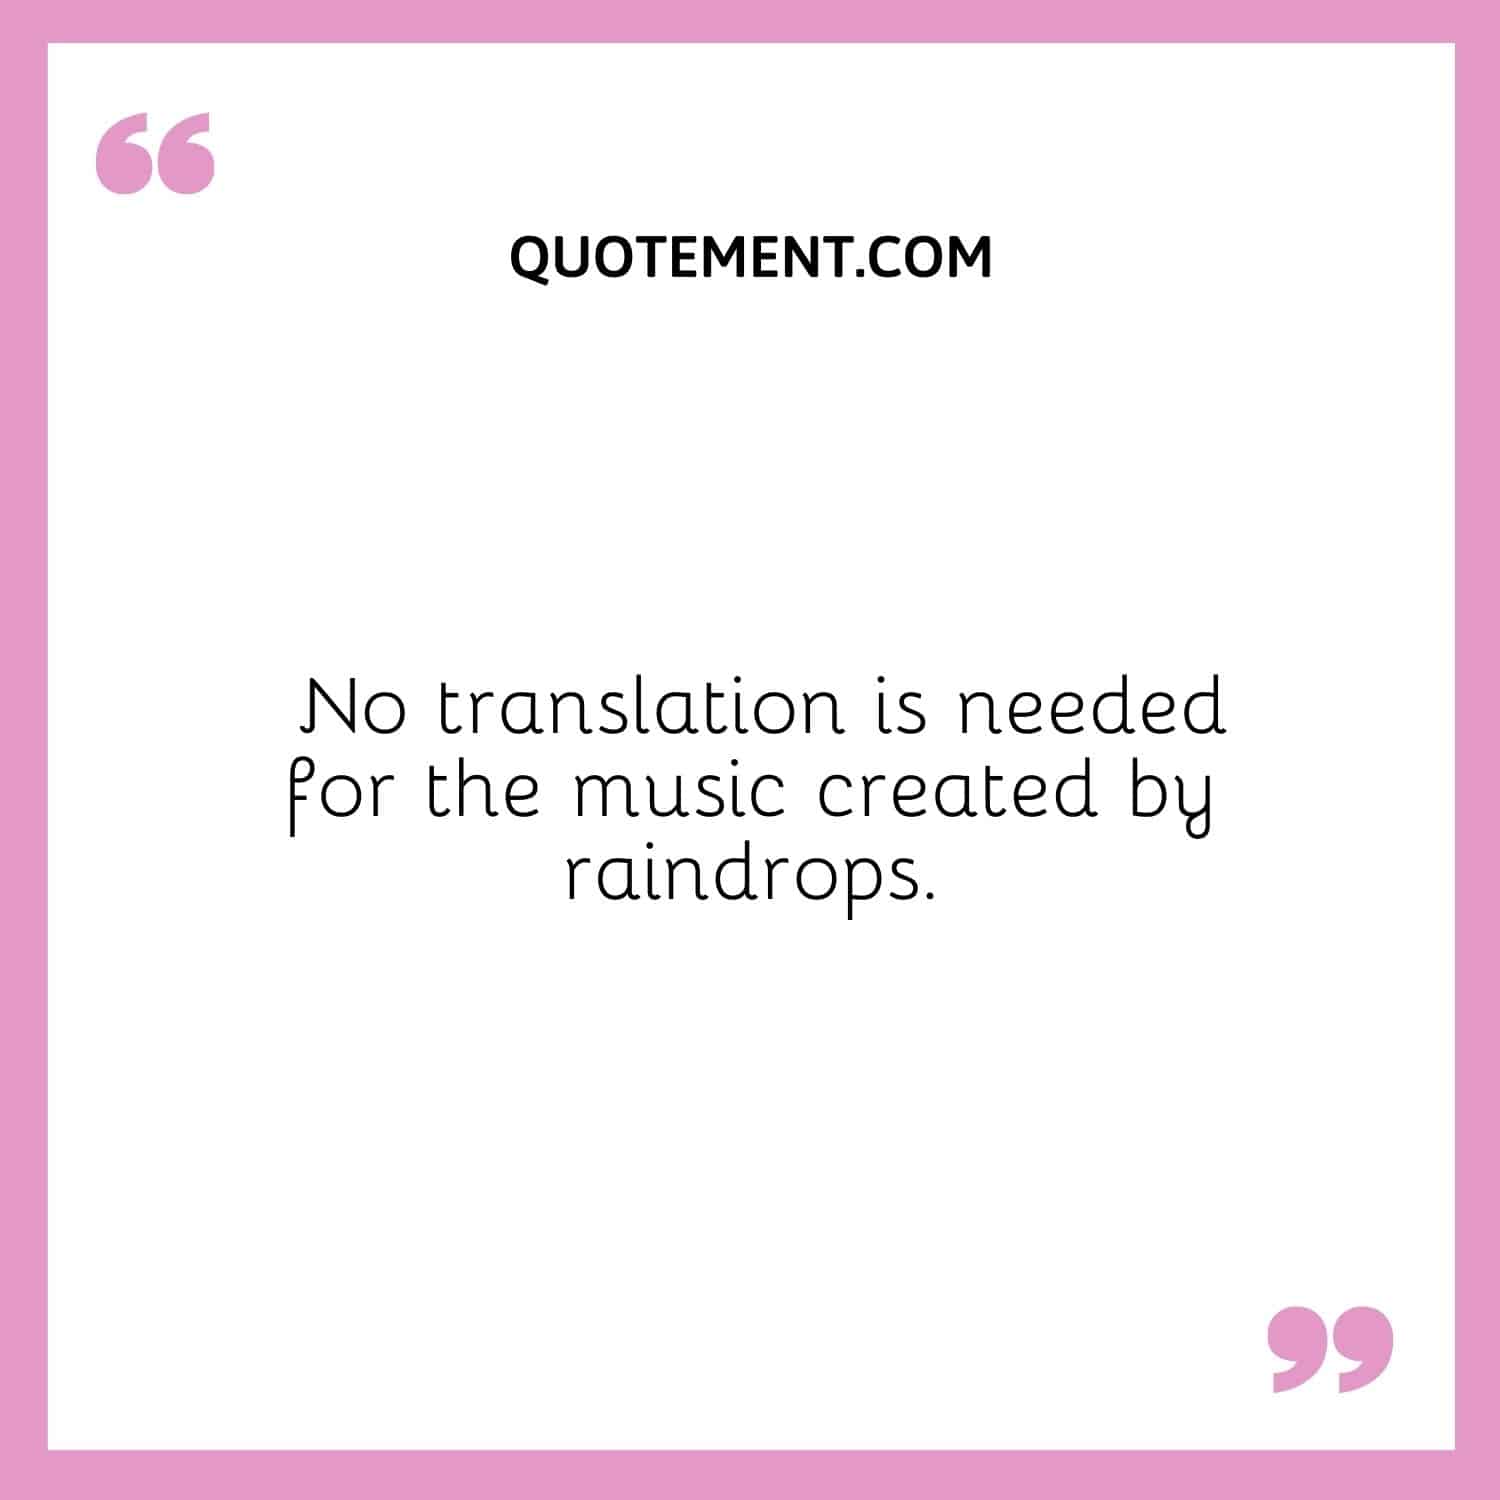 No translation is needed for the music created by raindrops.